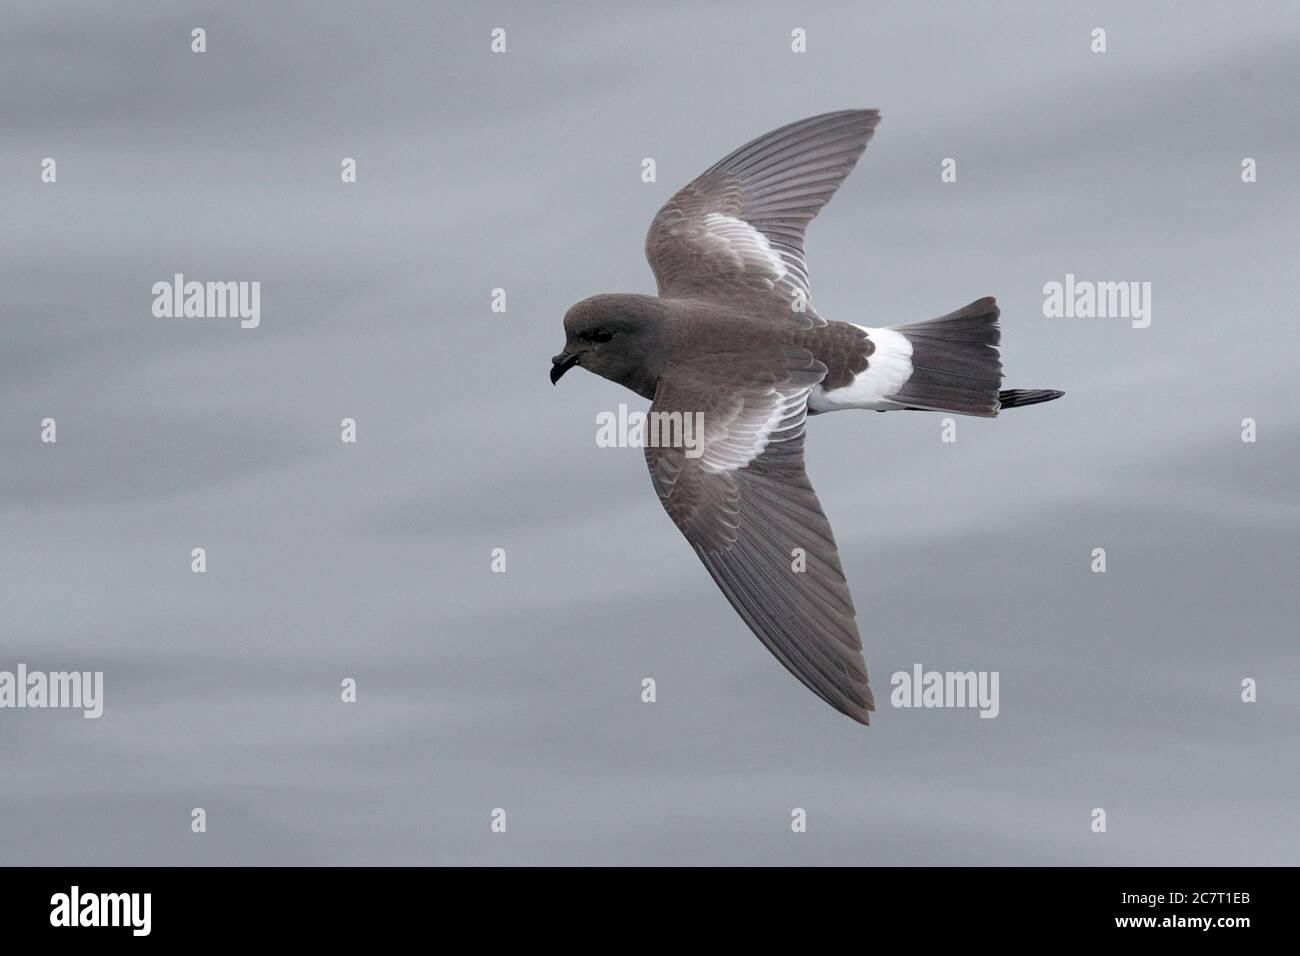 Pincoya Storm-Petrel (Oceanites pincoyae), dorsal view, flying over sea surface in Gulf of Ancud, Puerto Montt, south Chile 25th Feb 2020 Stock Photo